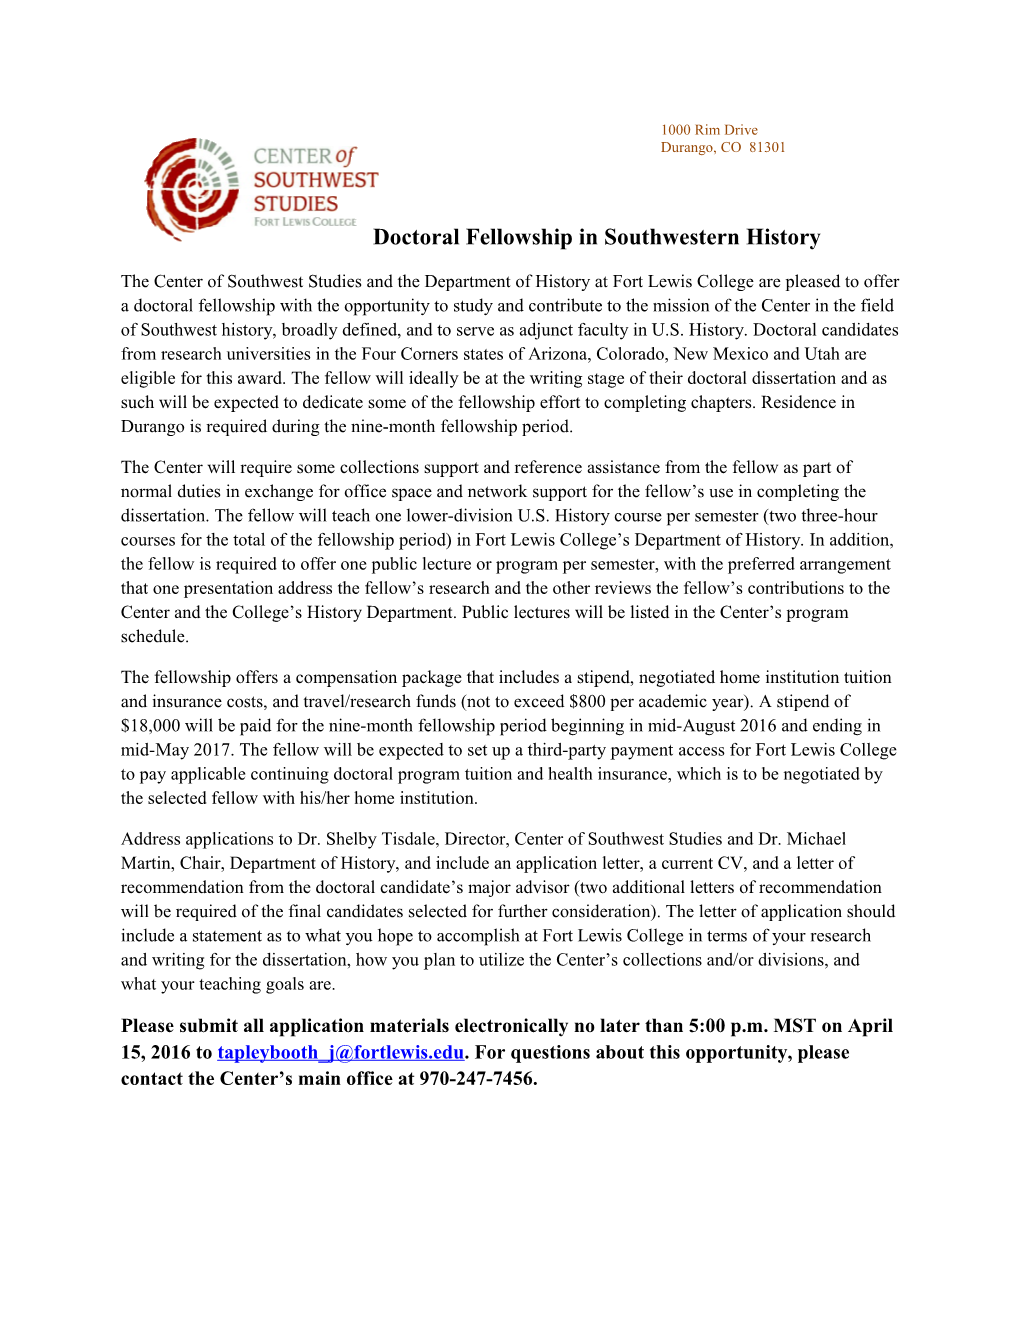 Doctoral Fellowship in Southwestern History